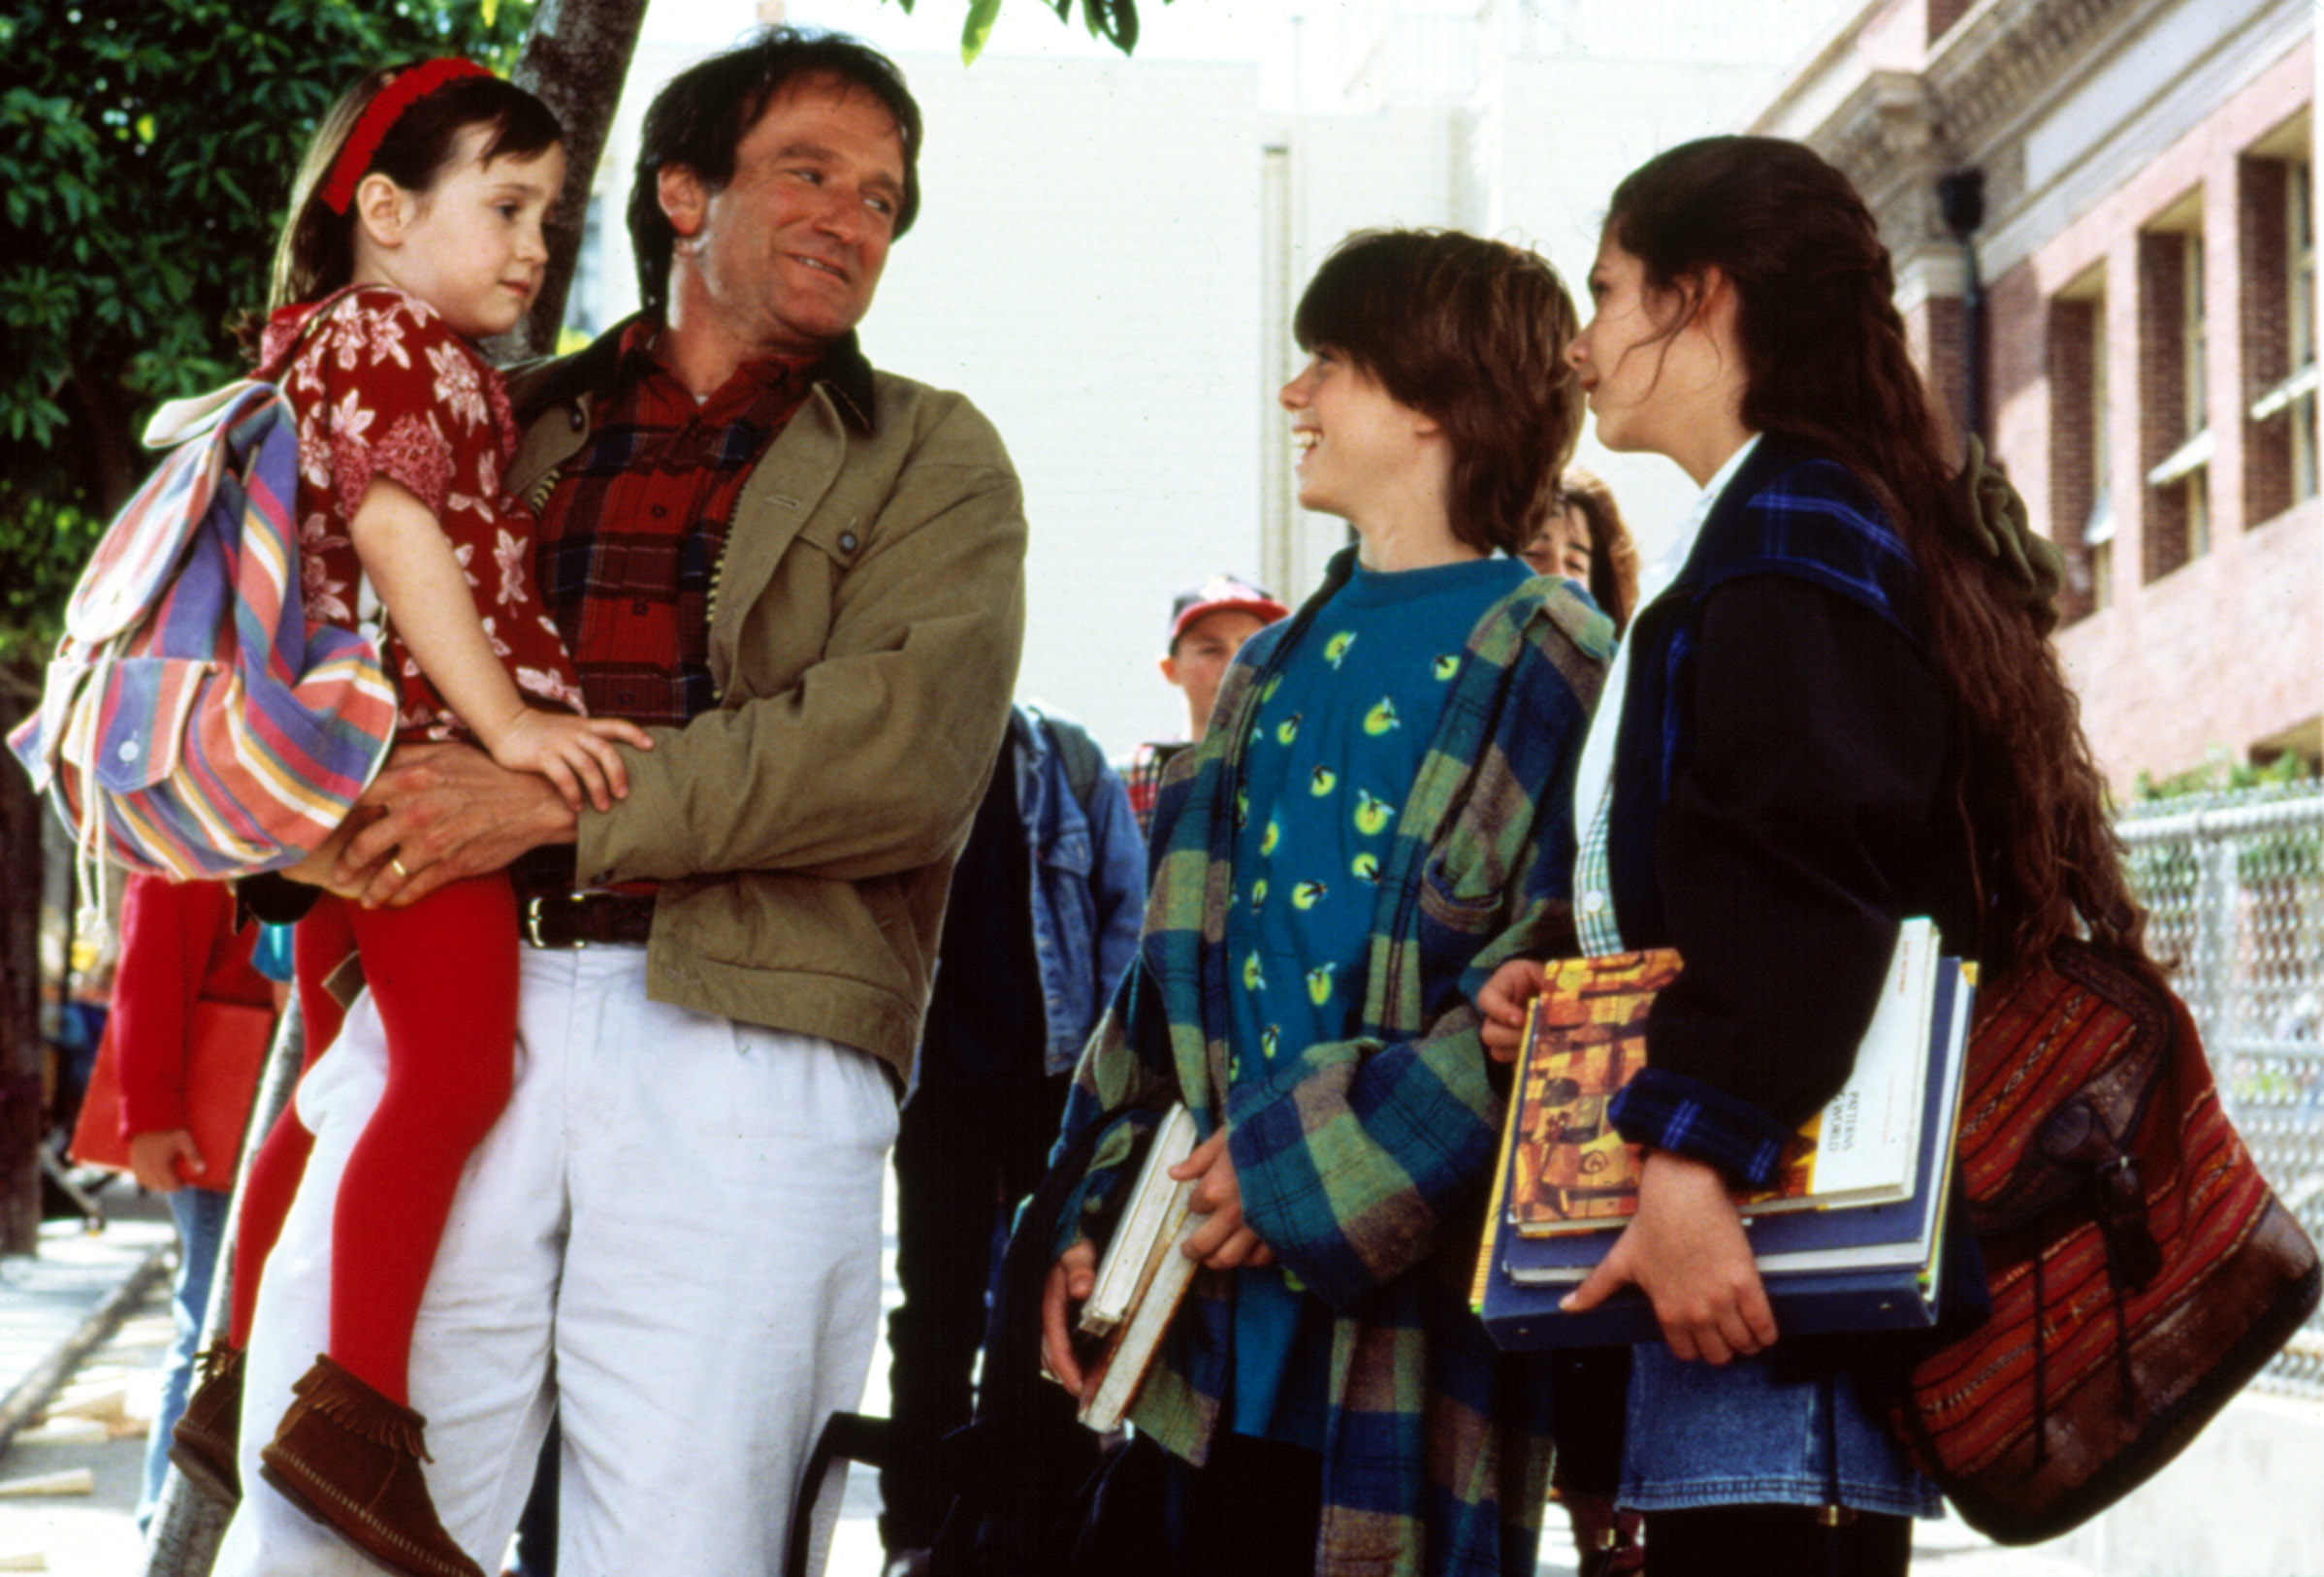 Robin Williams holding a child, with two others, in a scene from Mrs. Doubtfire